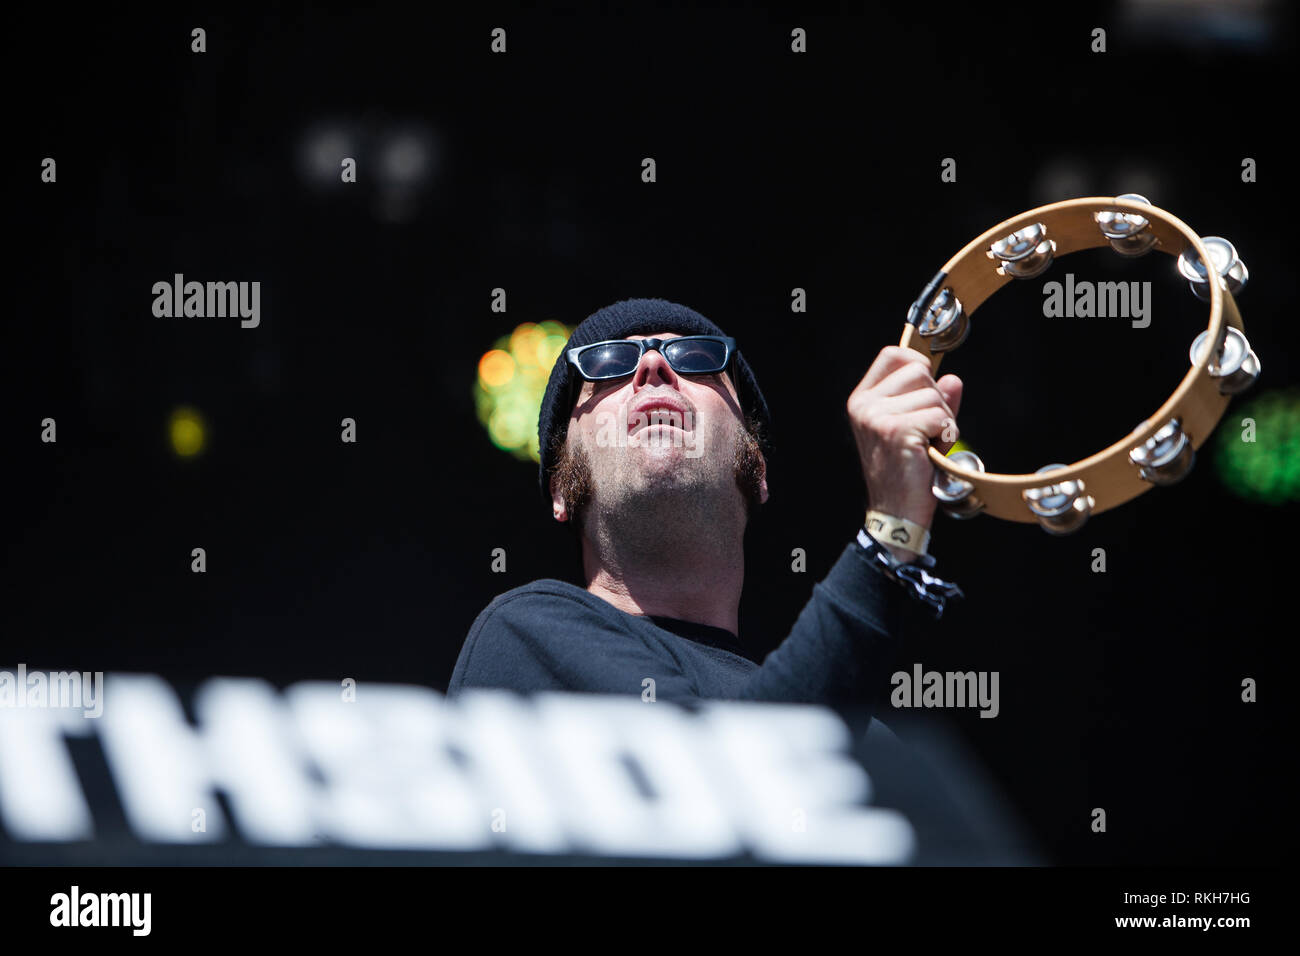 The psychedelic rock band The Brian Jonestown Massacre performs a live concert at the Danish music festival Northside 2014. Here vocalist and songwriter Joel Gion is seen live on stage. Denmark, 14/06 2014. EXCLUDING DENMARK. Stock Photo